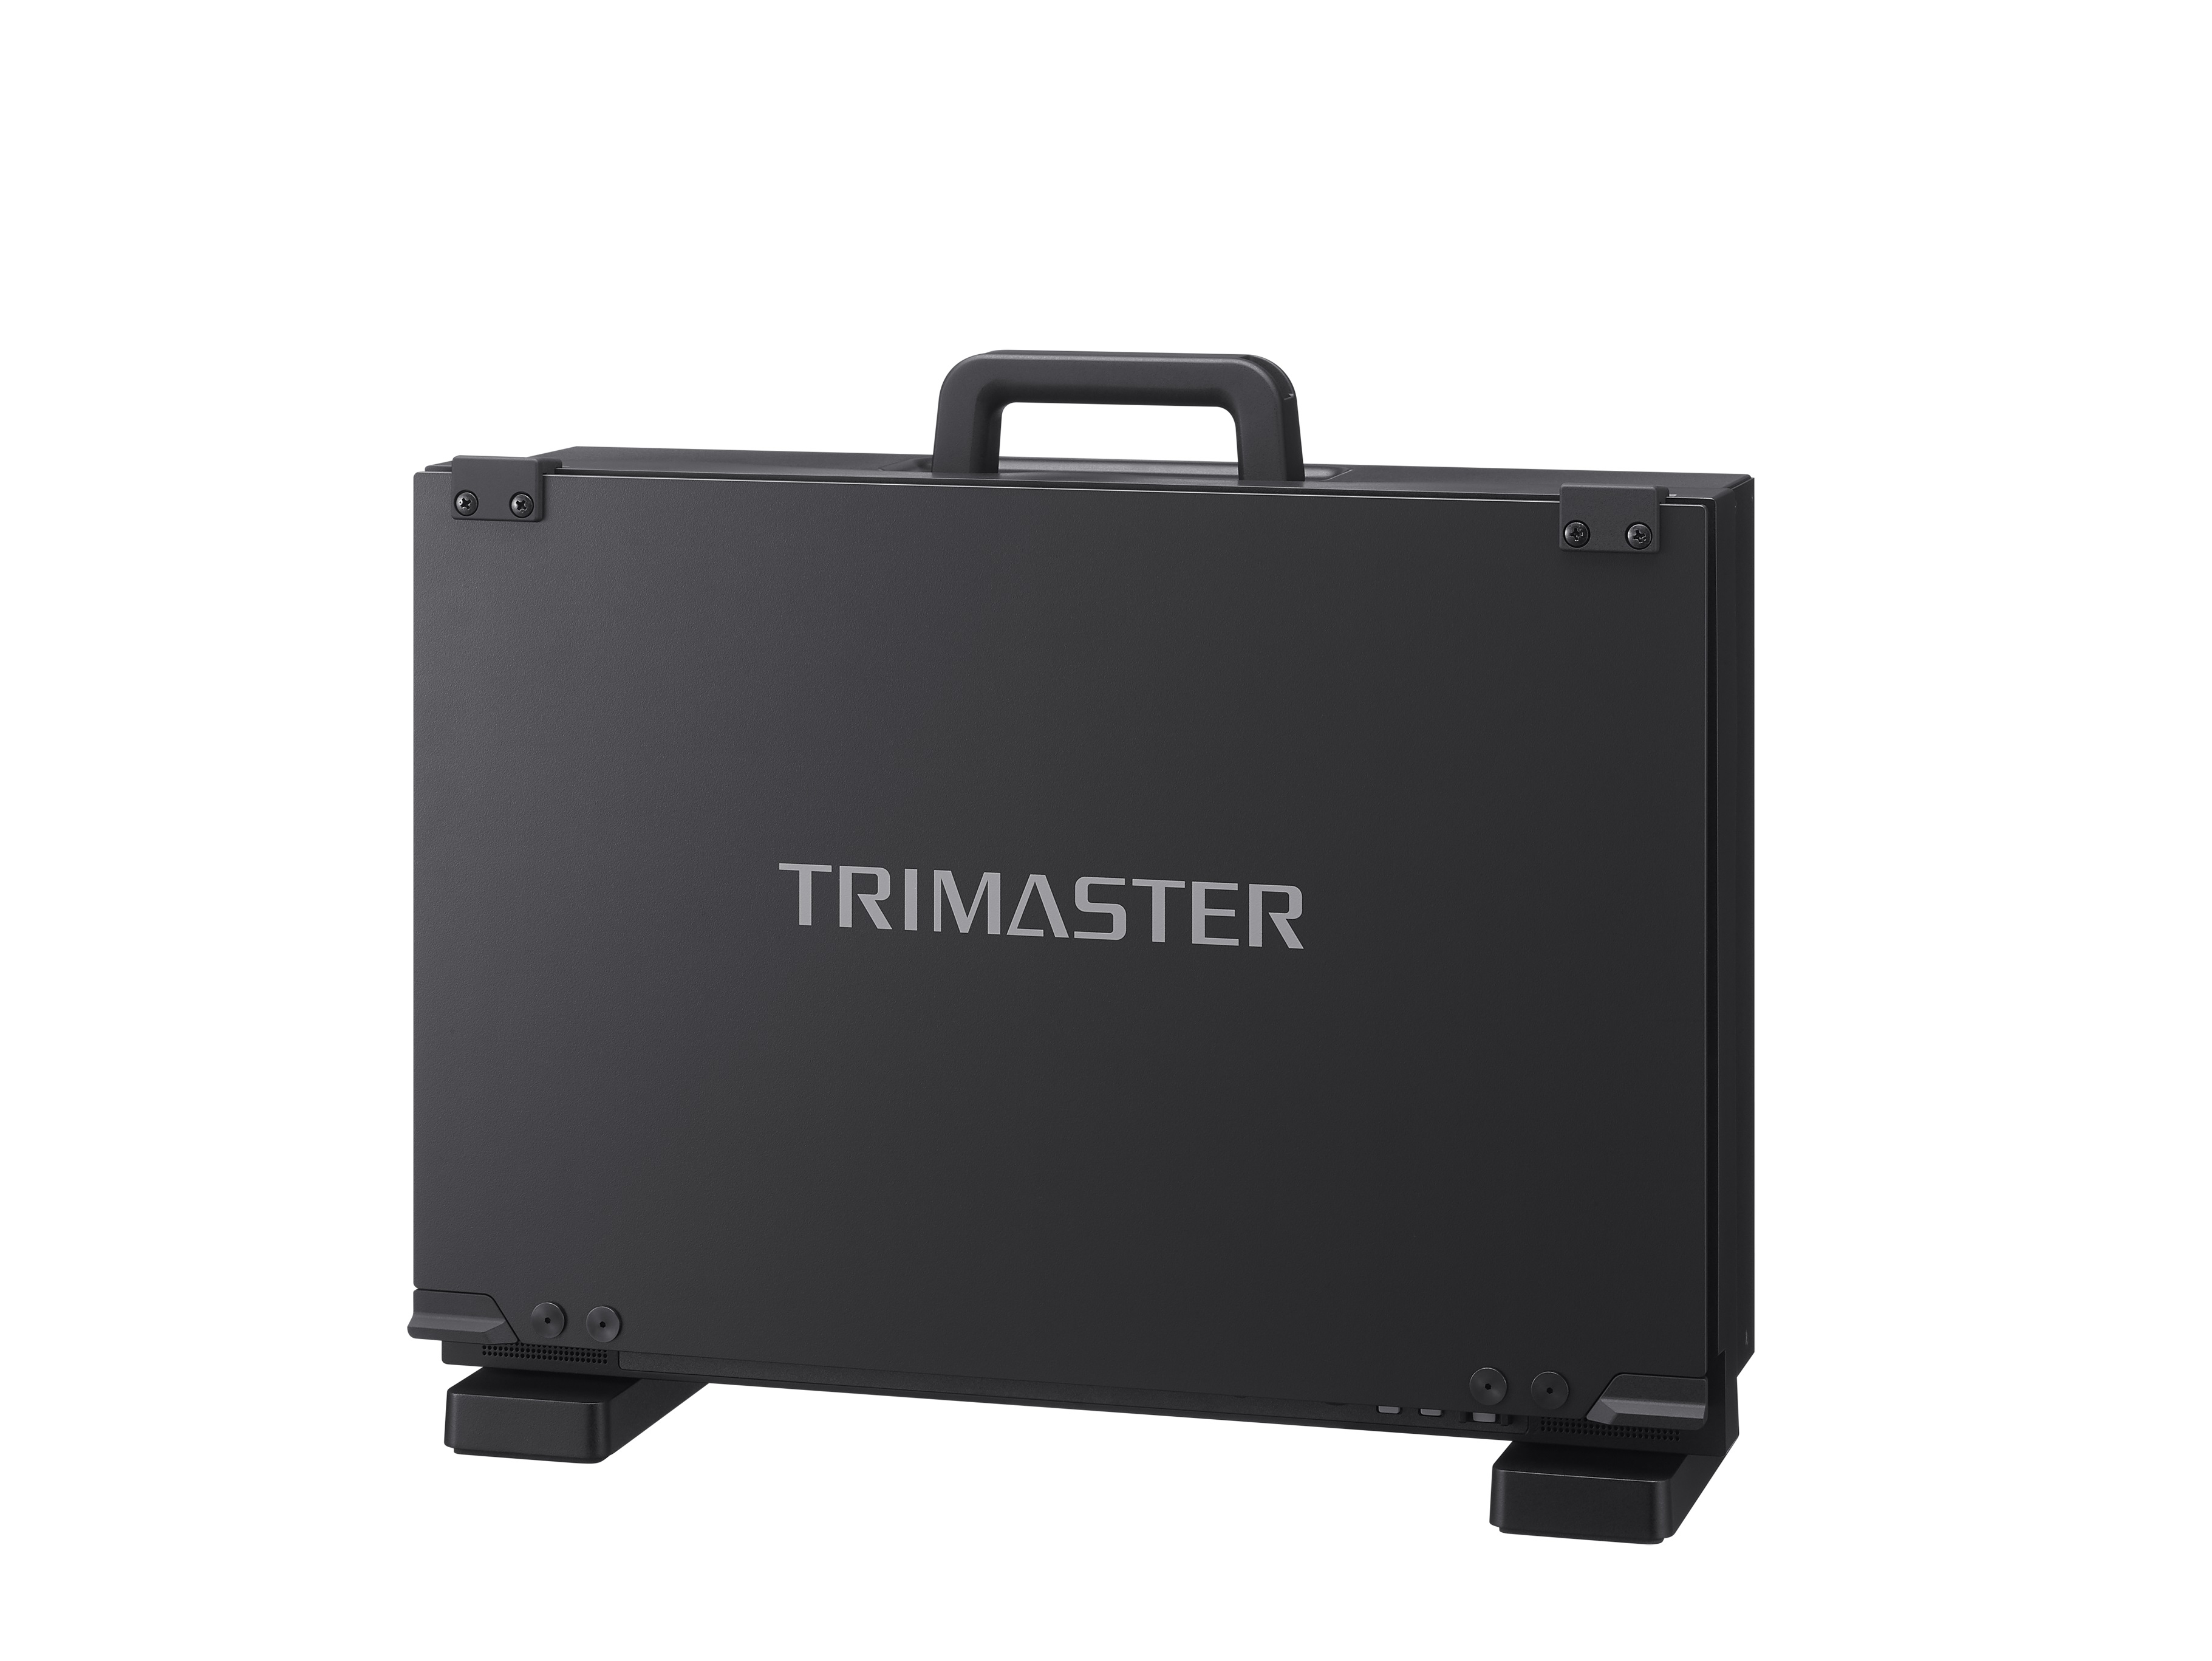 PVM-X1800 18.4-inch 4K HDR TRIMASTER picture monitor - Sony 